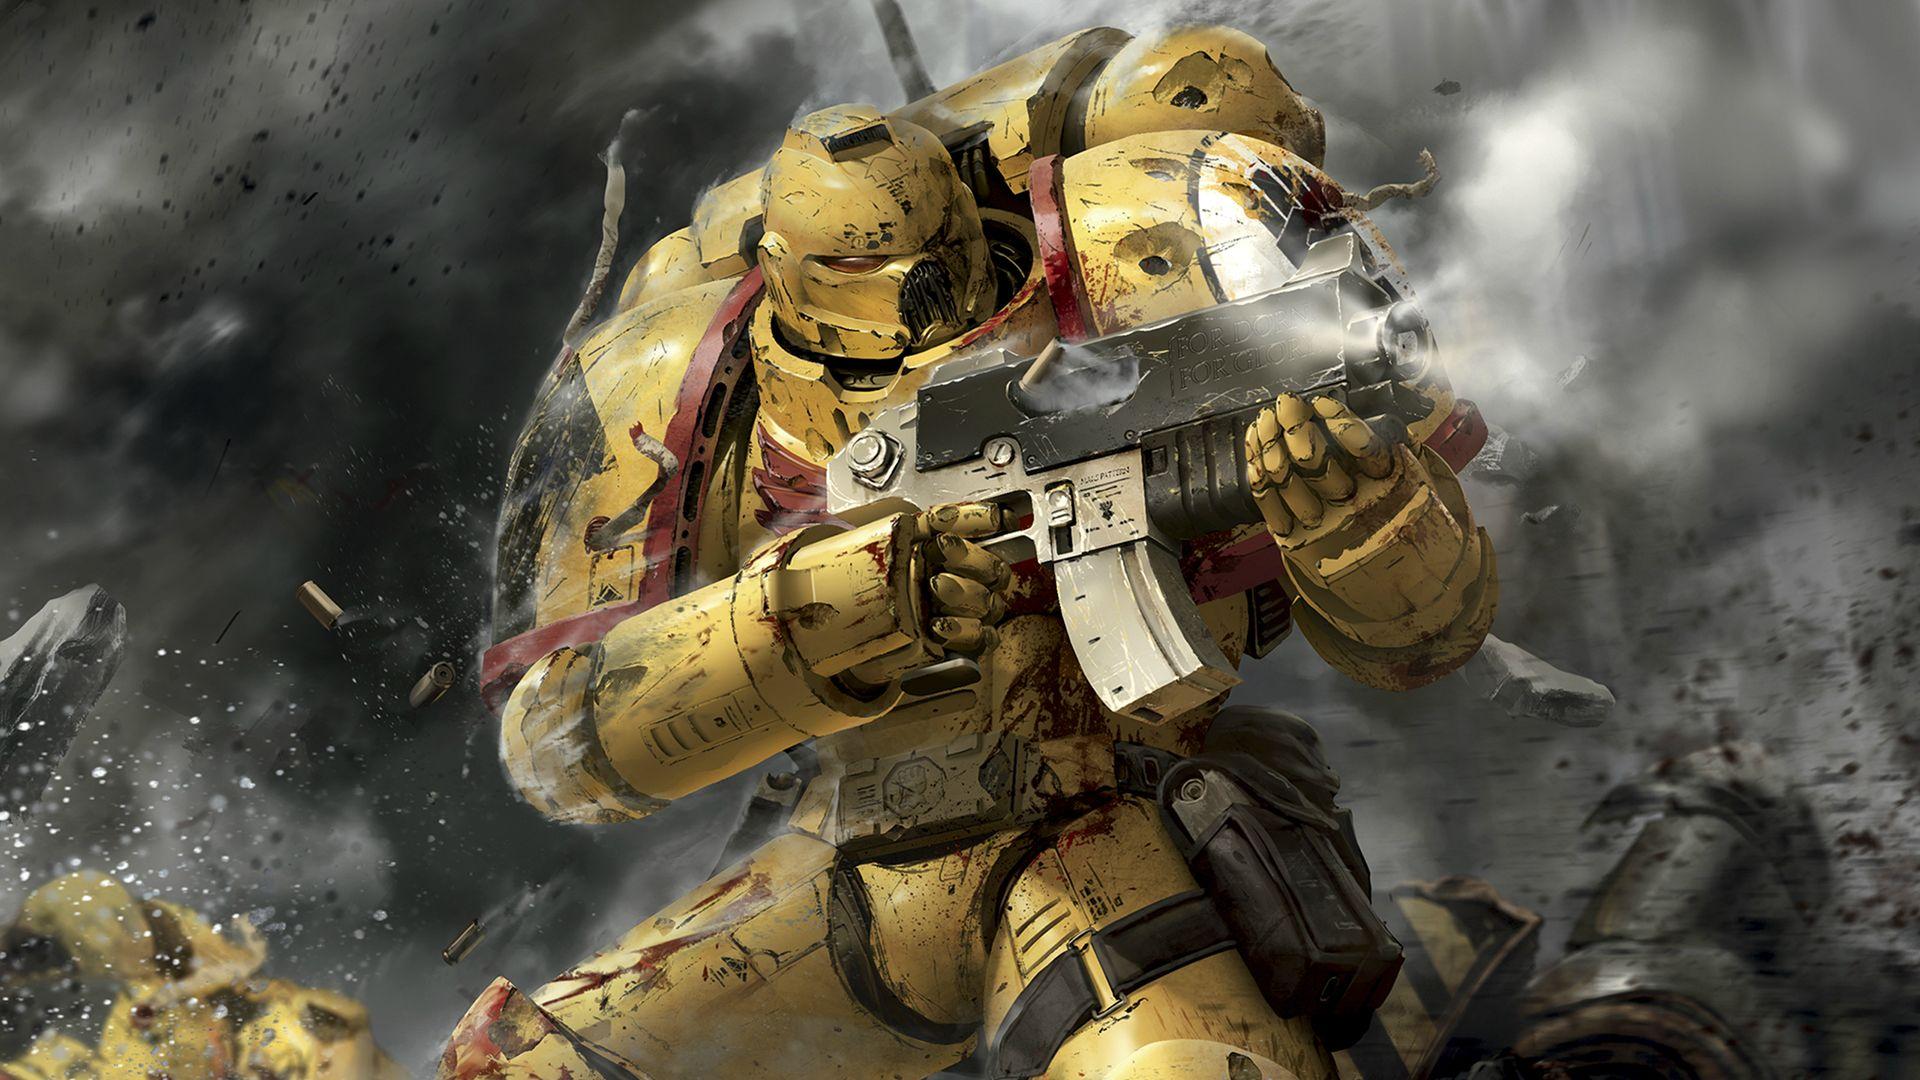 Imperial Fists Space Marine HD Wallpaper 1920x1080